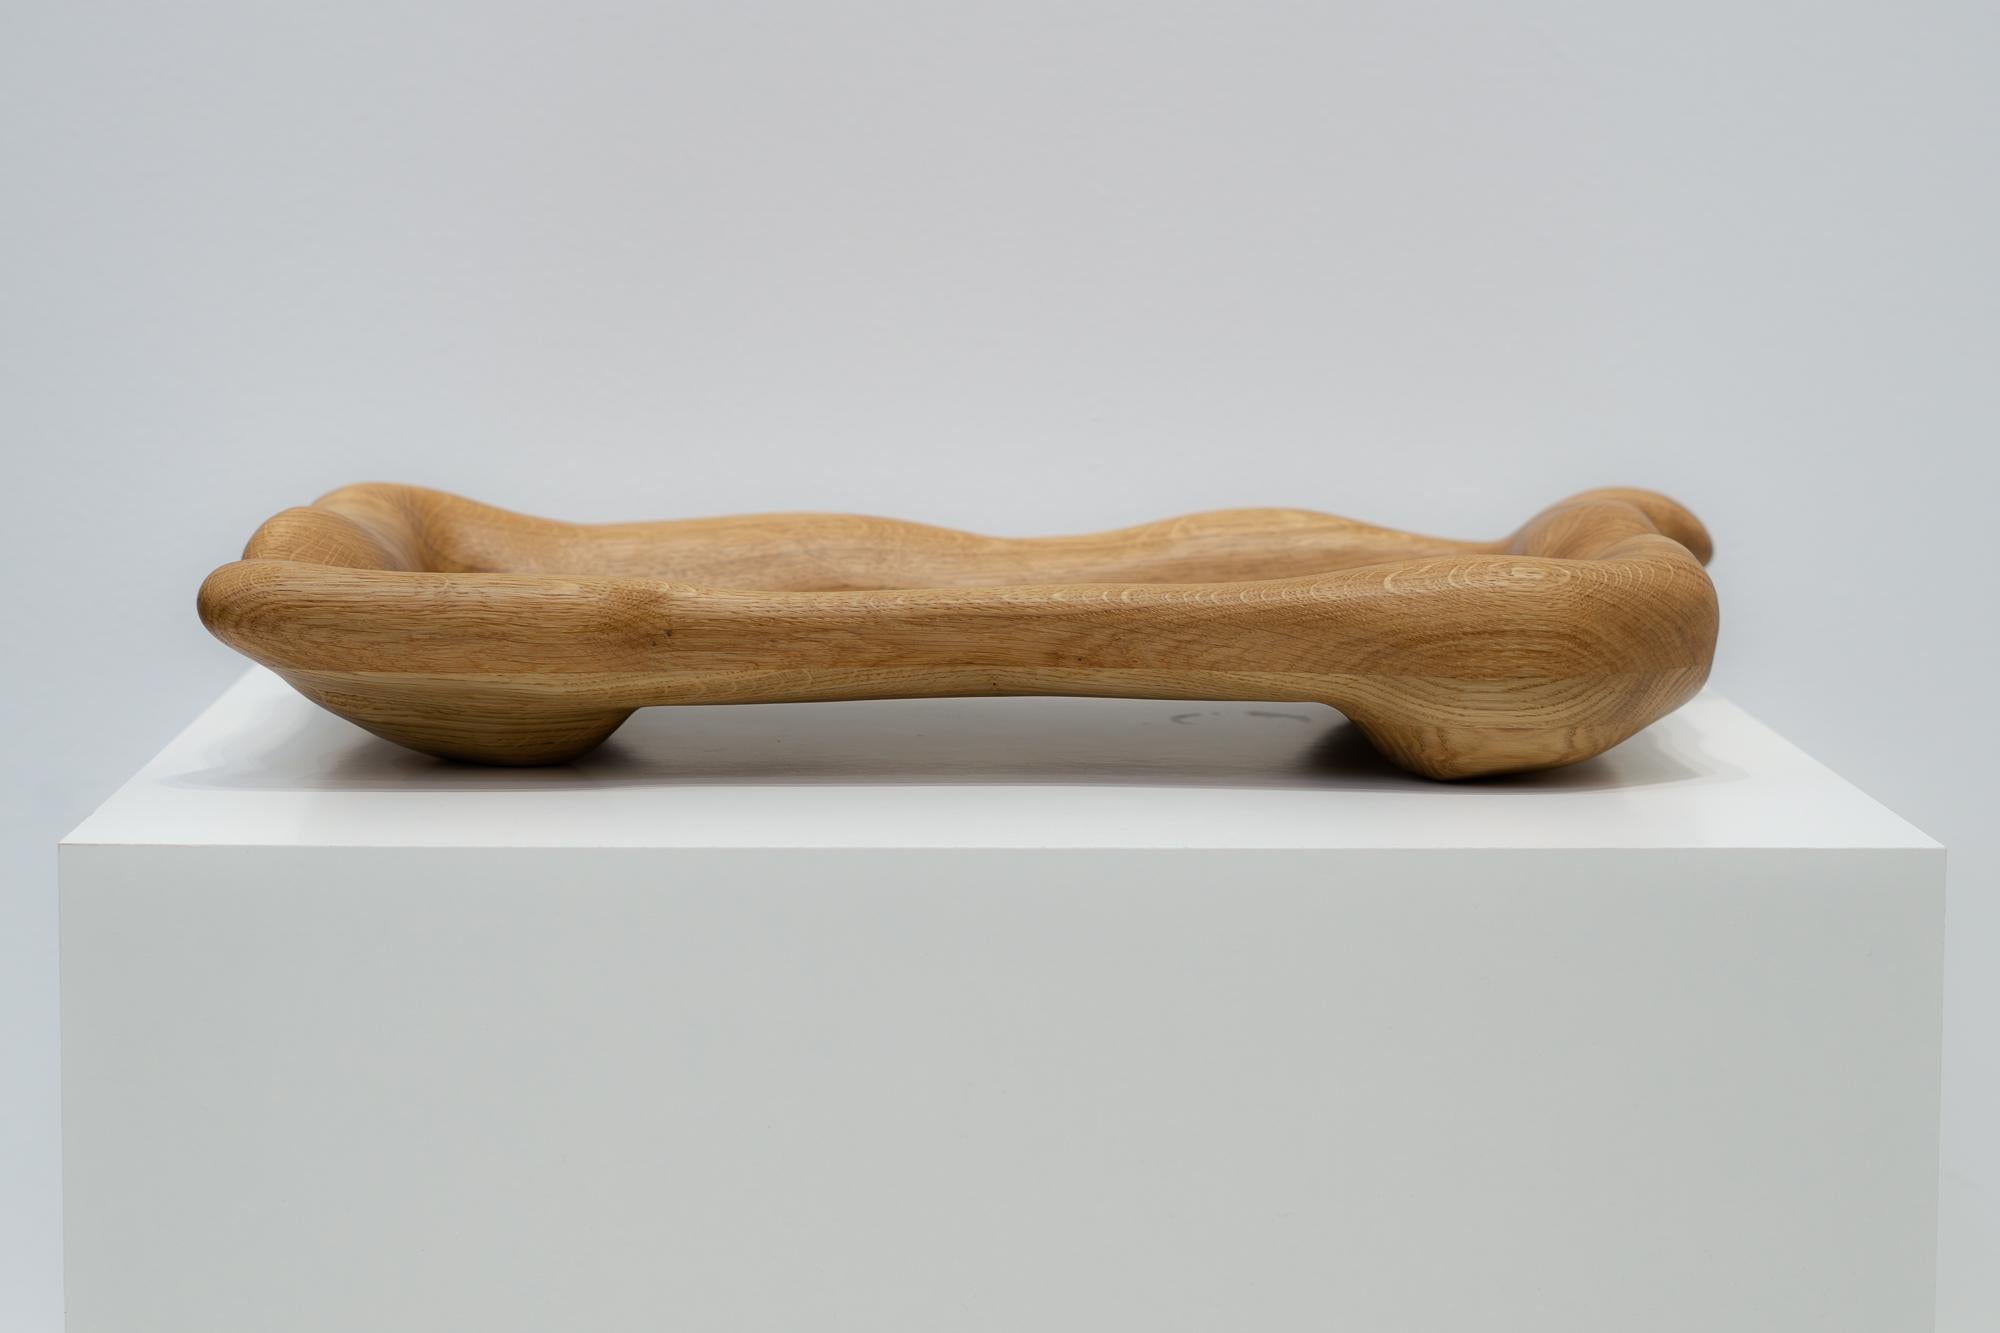 The serving tray is shaped using various hand tools, making each piece unique with its own distinctive wood grain. It is made from high-quality oak wood and finished with a hardwax oil.

The serving tray can be customized according to your